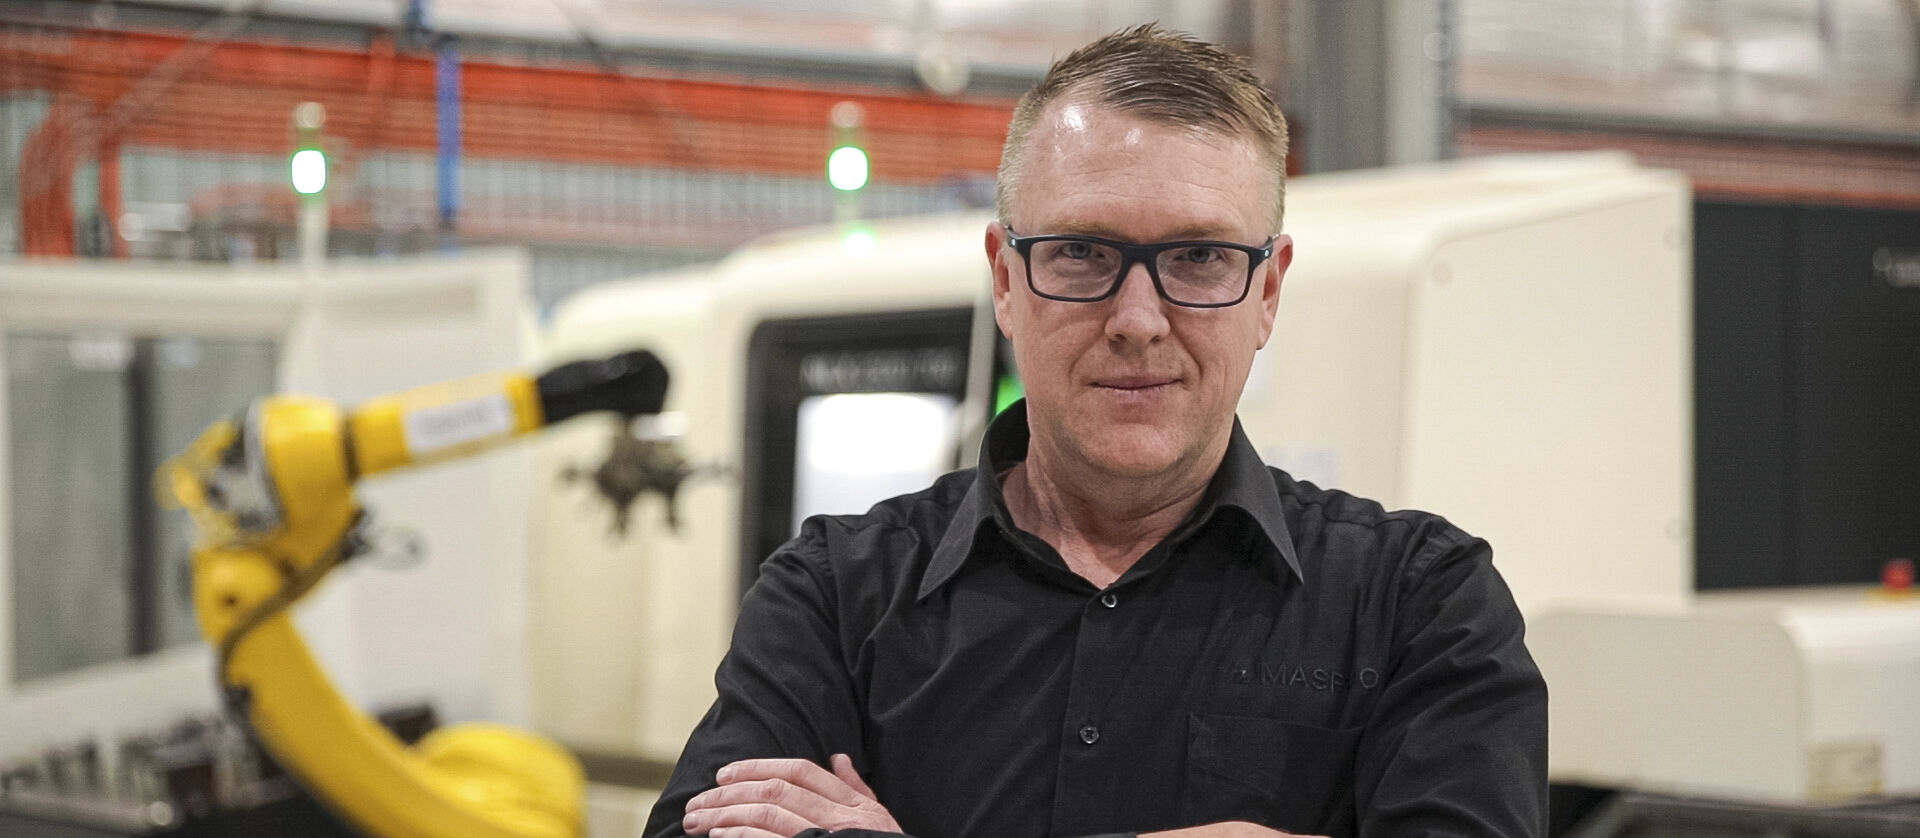 MASPRO CEO Greg Kennard. MASPRO Engineering in Condobolin has been named as a finalist in the Employer of Choice category in the 2024 Western NSW Business Awards. Image Credit: MASPRO Engineering.